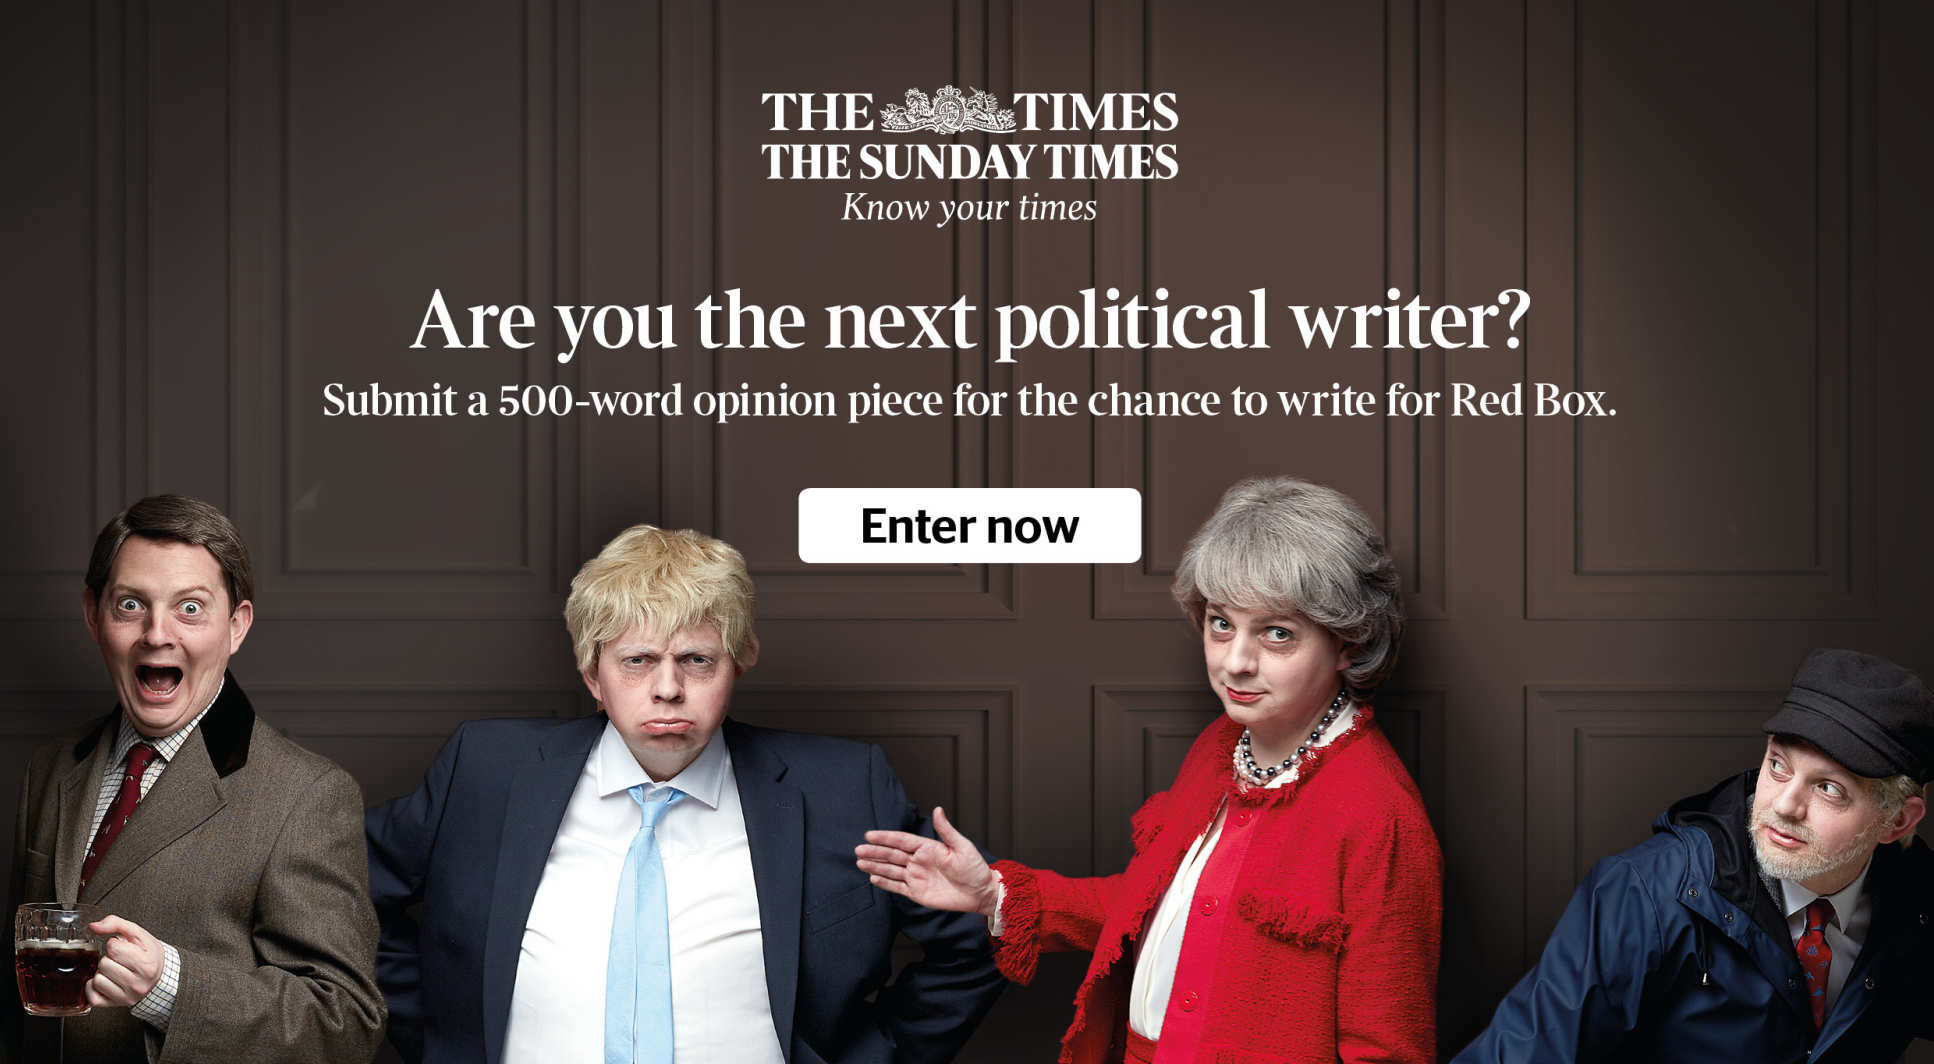 The competition poster, featuring Matt Chorley dressed as UK political leaders